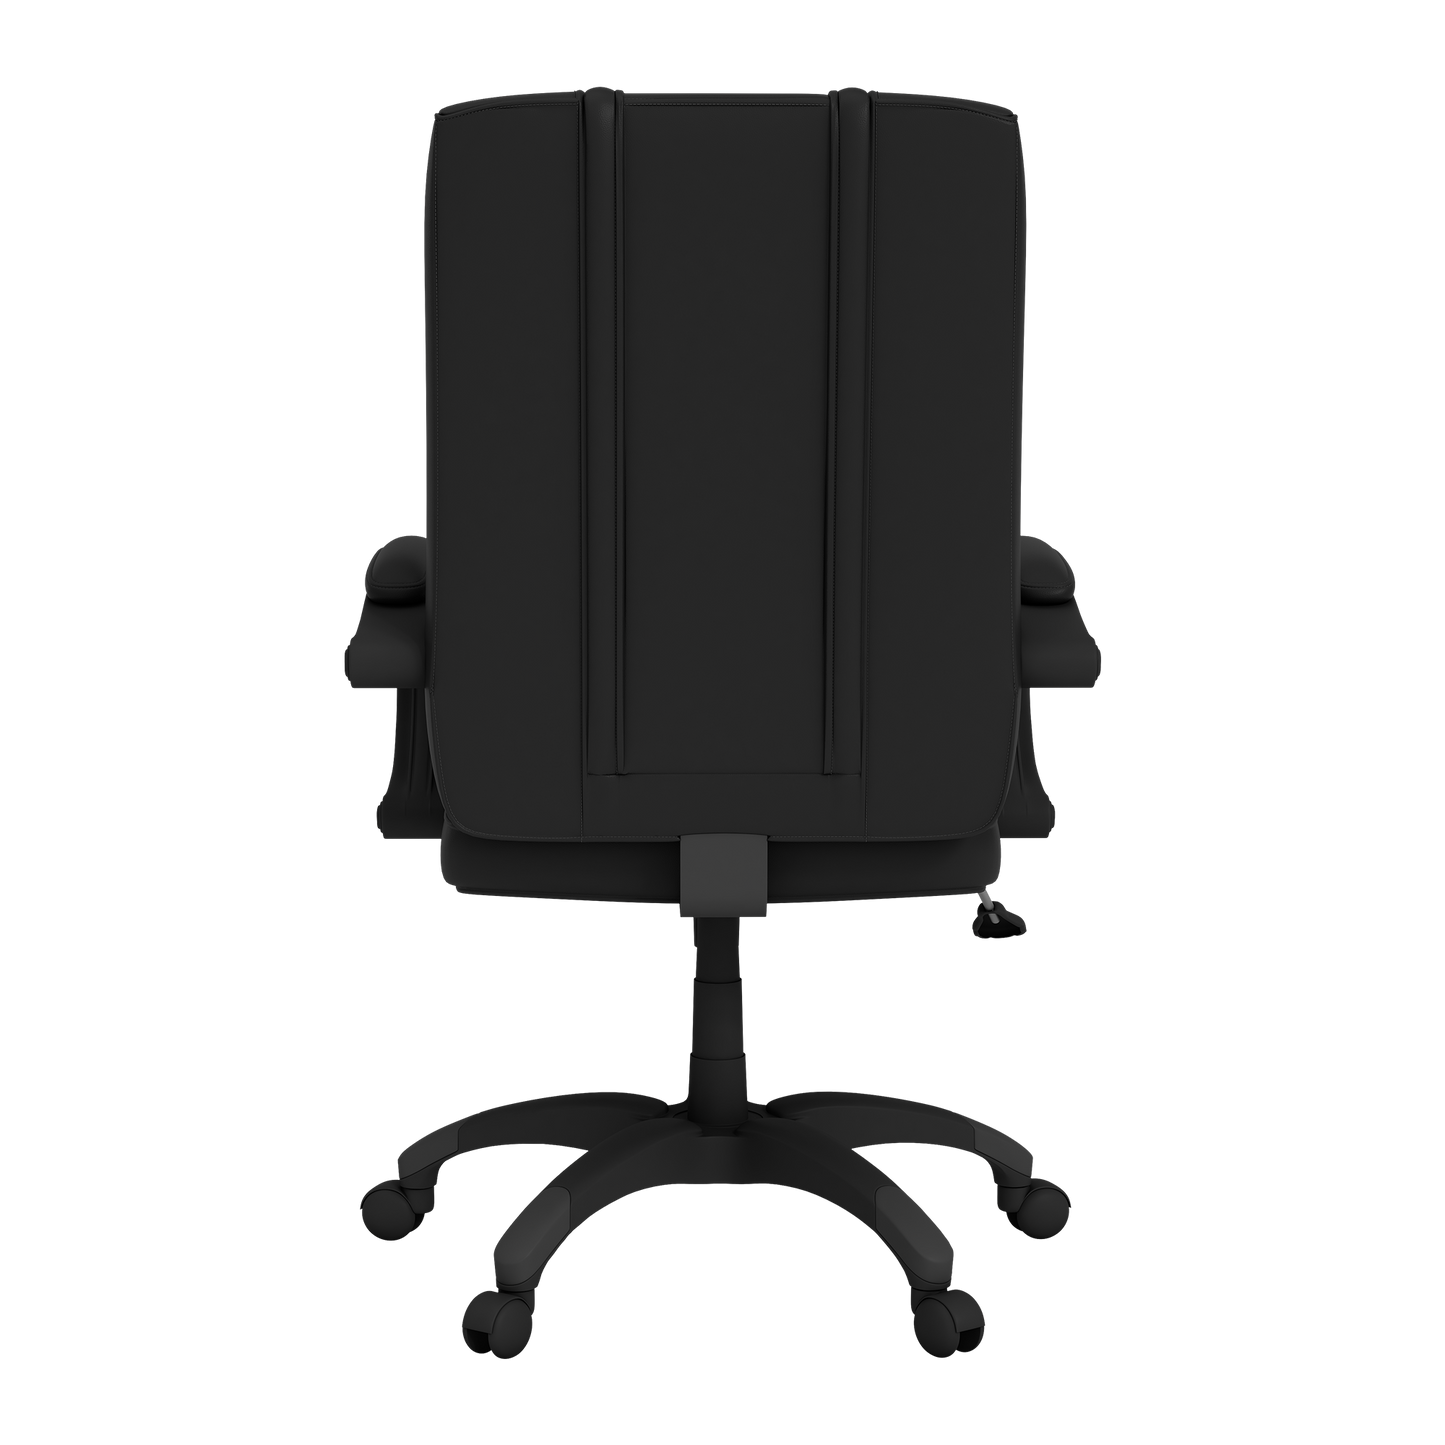 Office Chair 1000 with Cleveland Browns Classic Logo